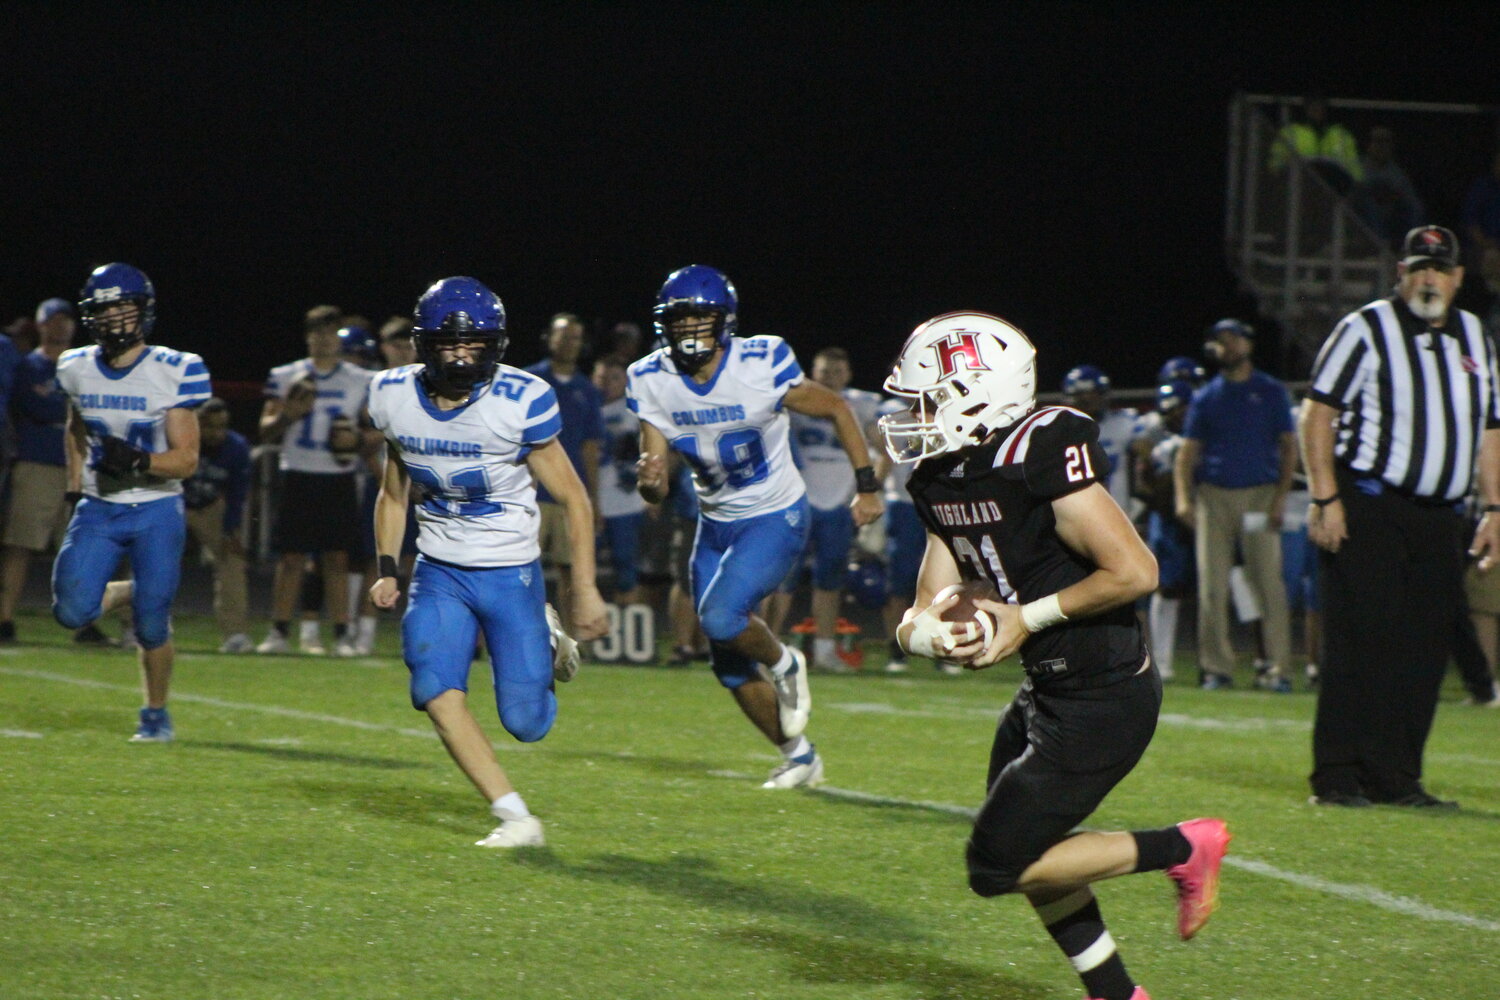 Highland's Jack Peiffer heads downfield after catching his first varsity pass against Columbus.